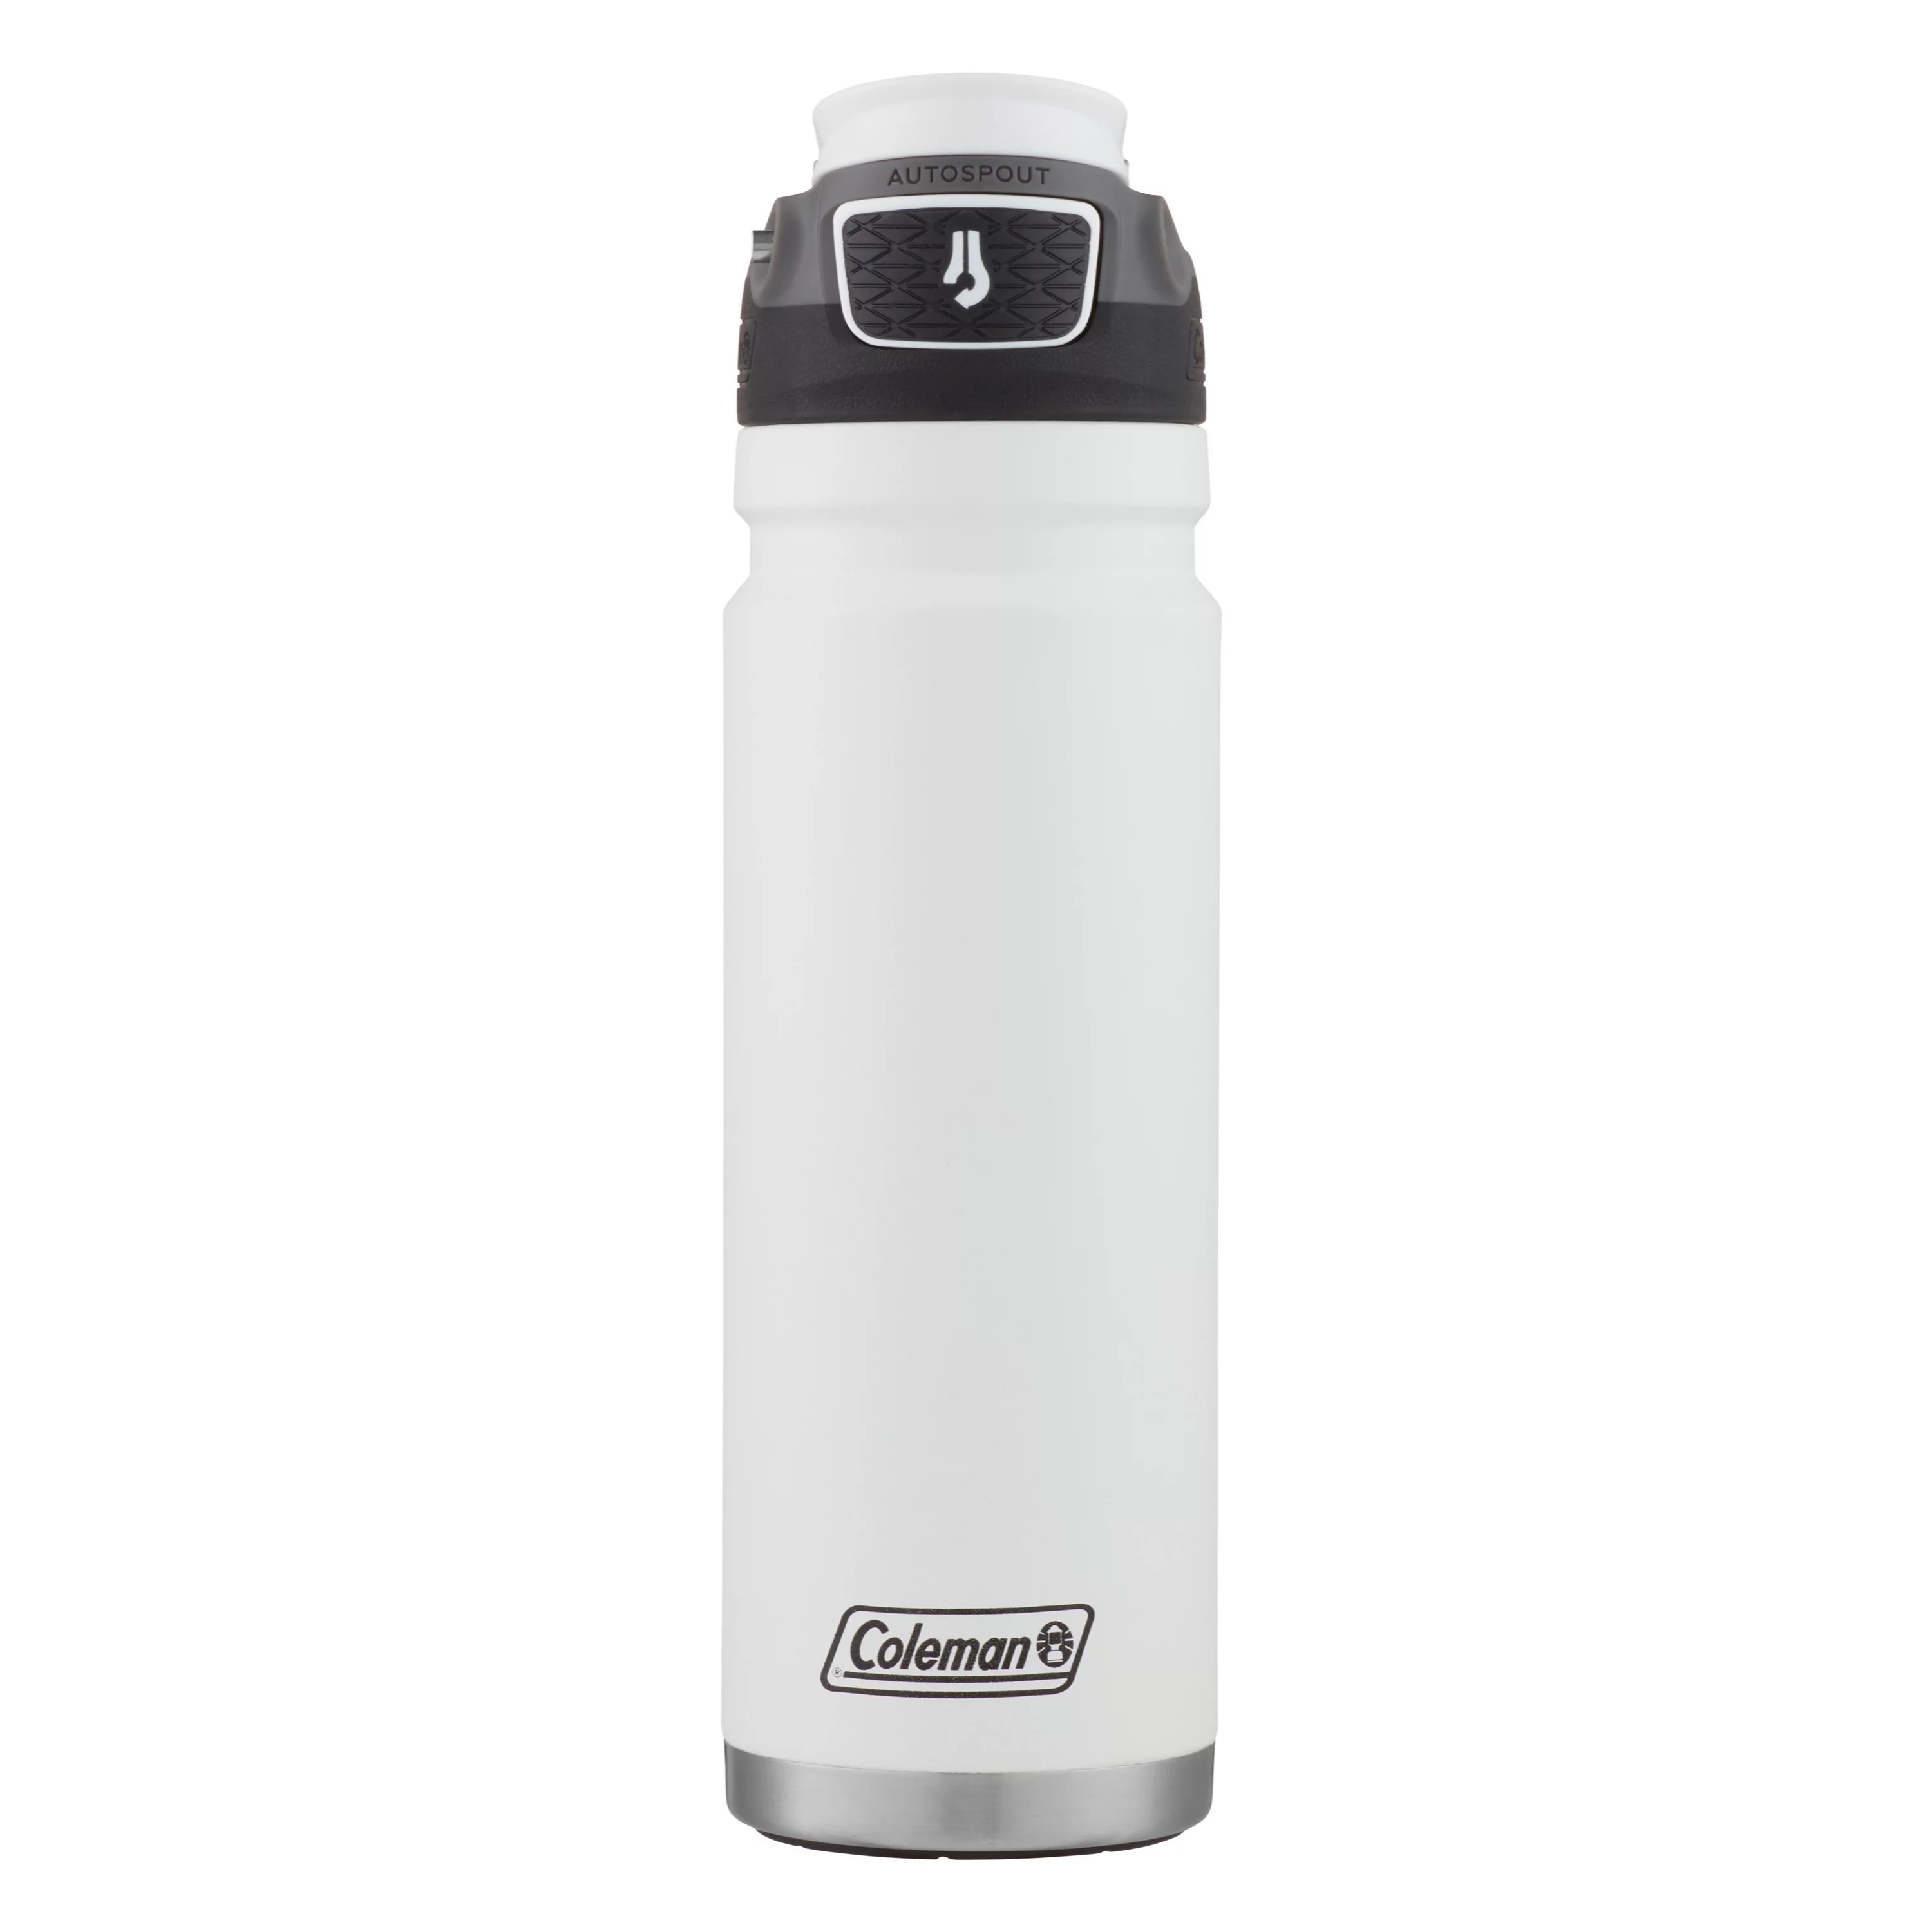 Coleman Switch Autospout Stainless Steel Insulated Water Bottle, 24 oz., White Cloud